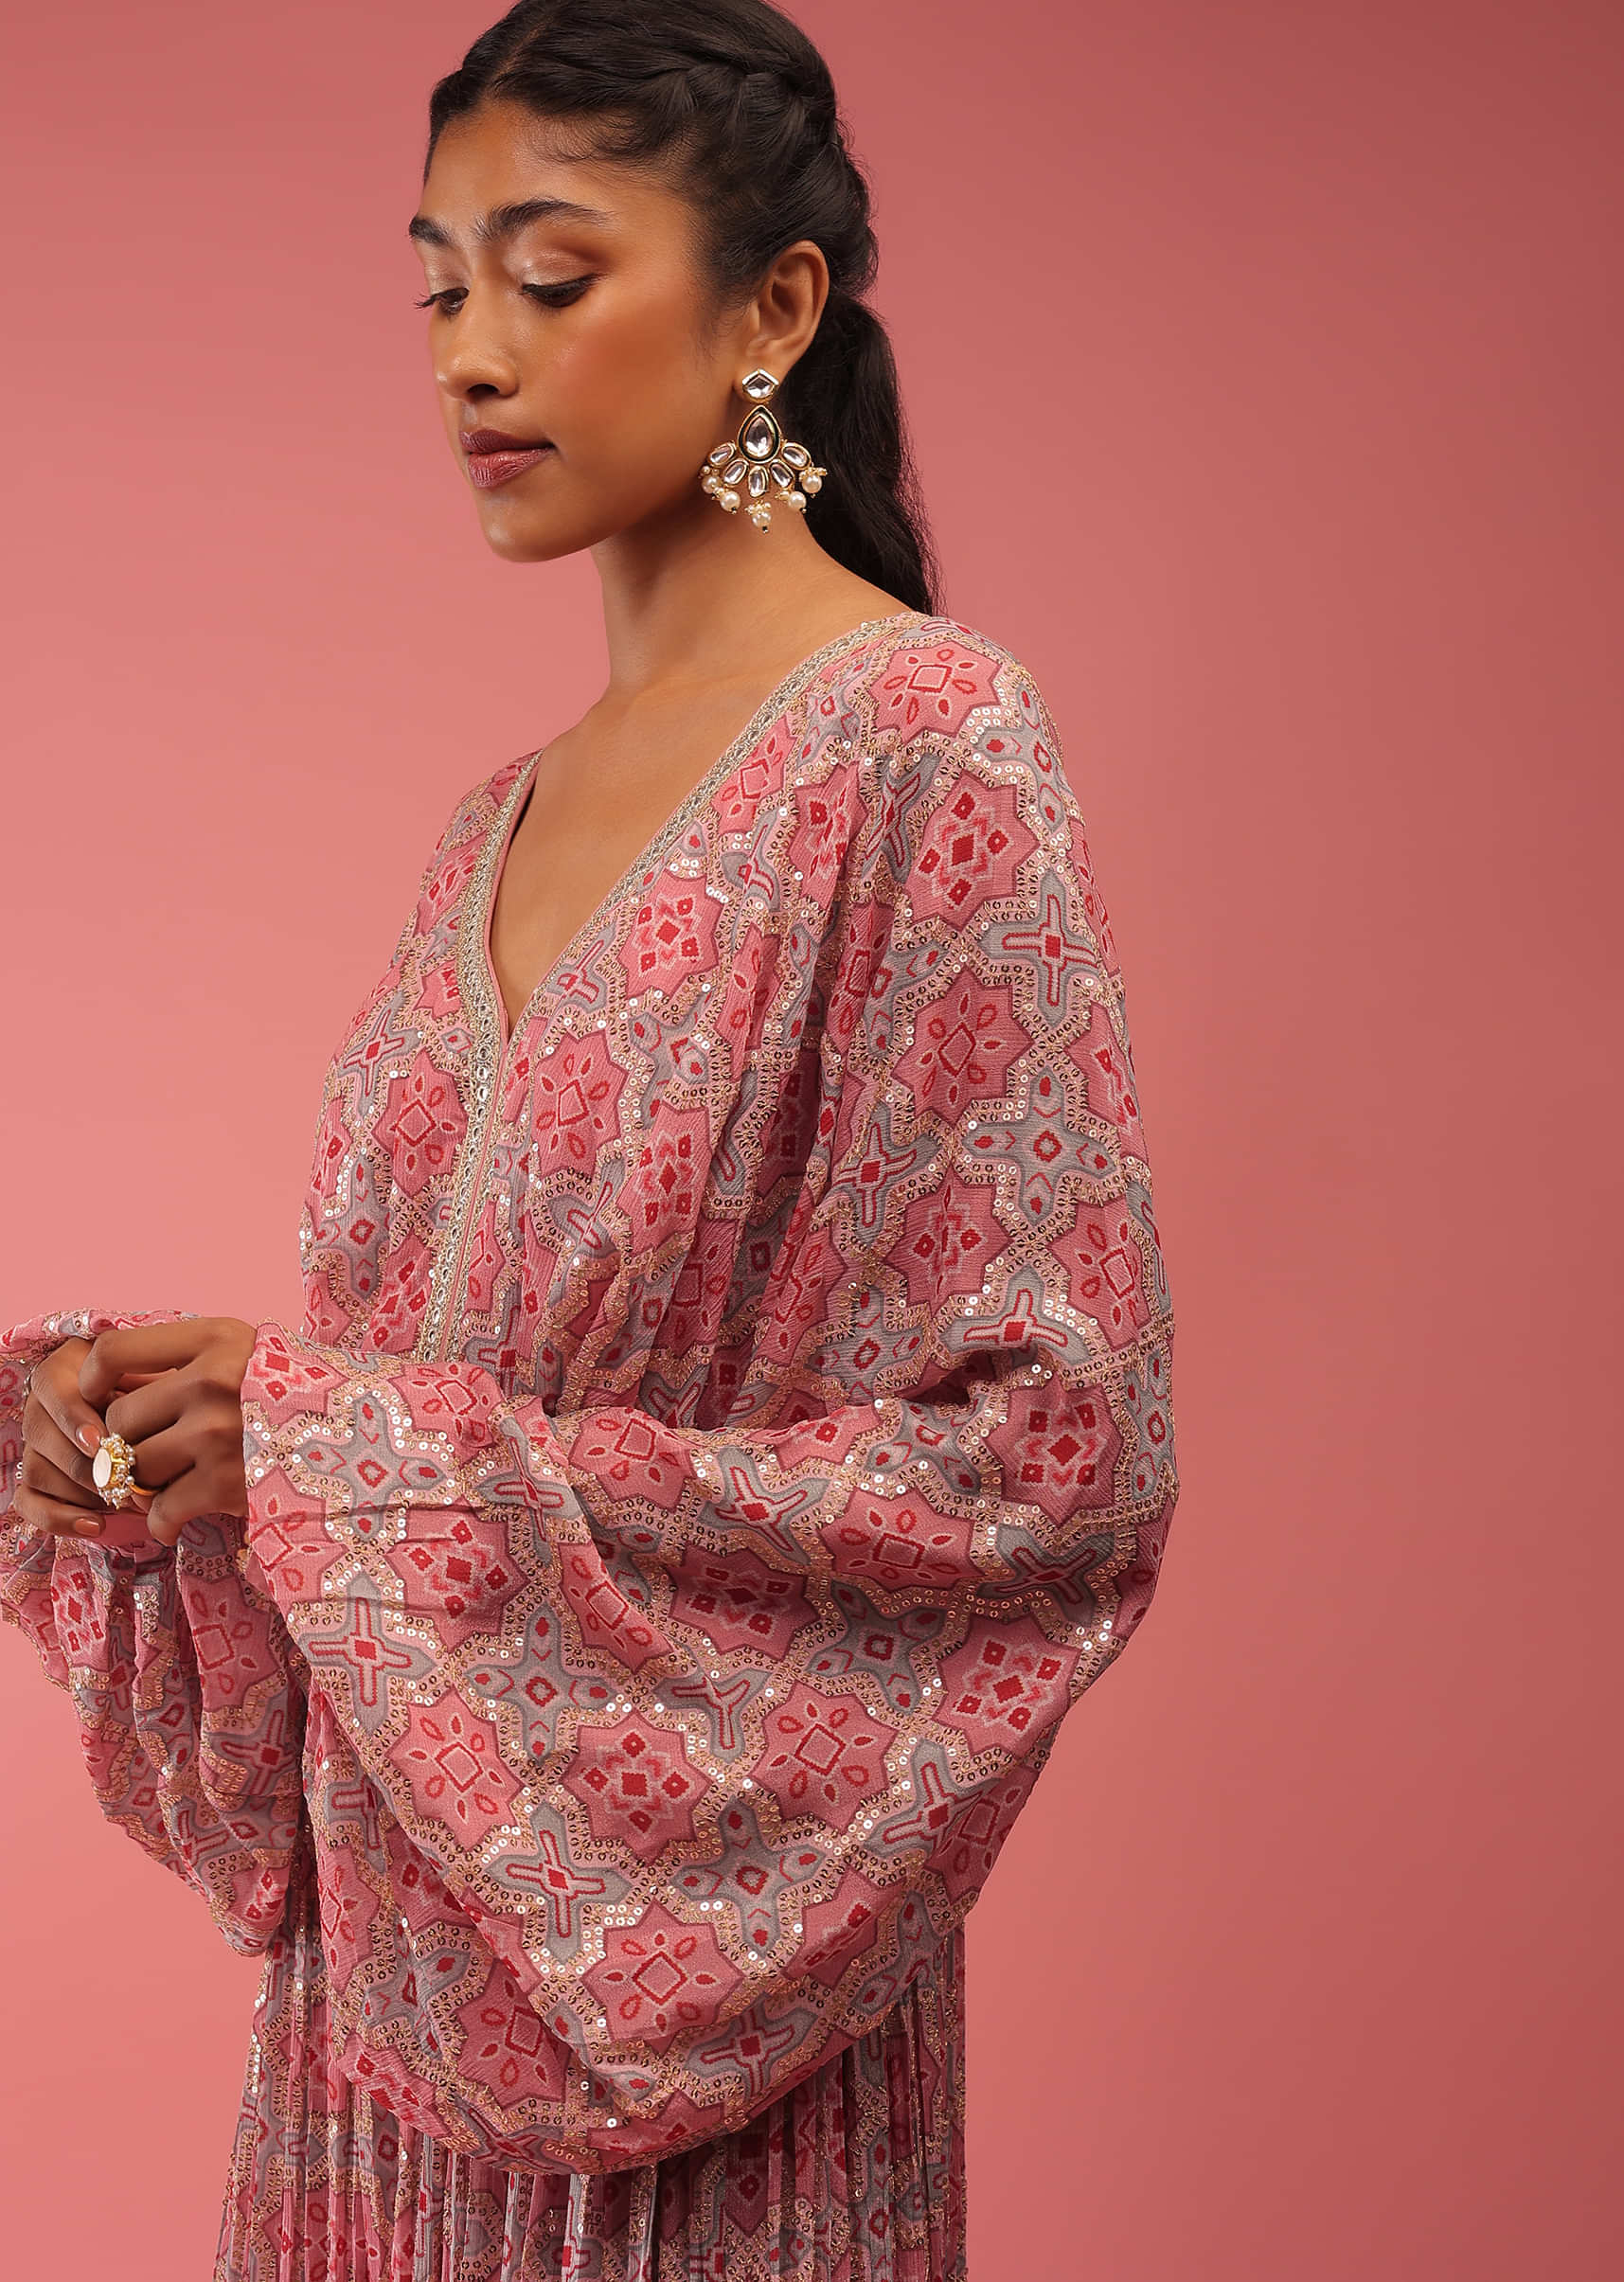 Mauve Pink Jumpsuit In Seamless Print With Golden Zari Embroidery, It Is Crafted In Organza With Balloon Sleeves